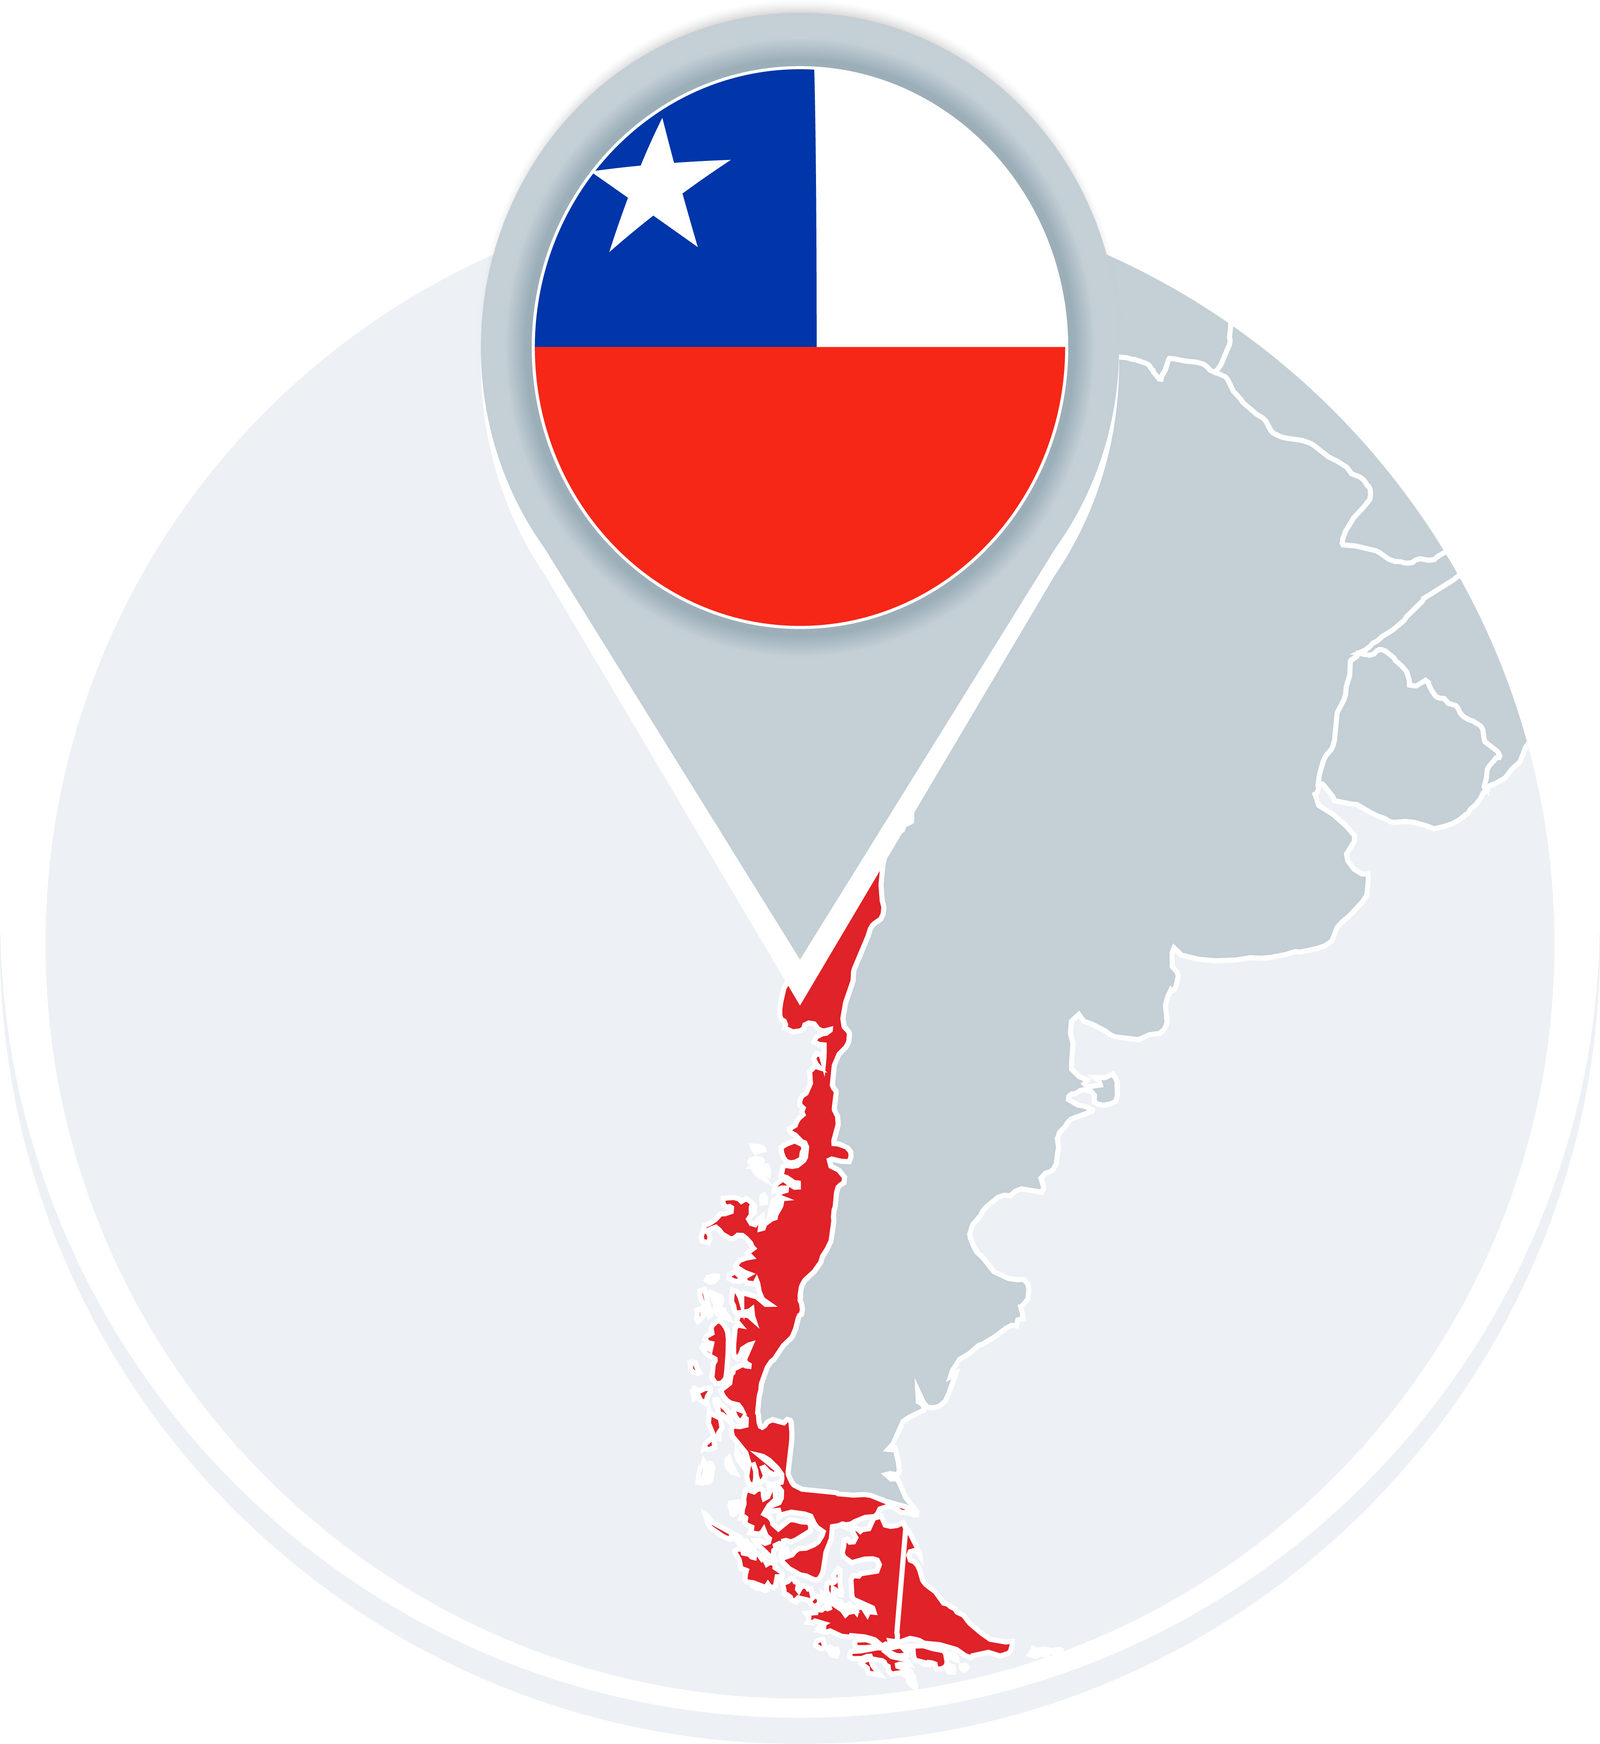 Chile map and flag, map icon with highlighted Chile